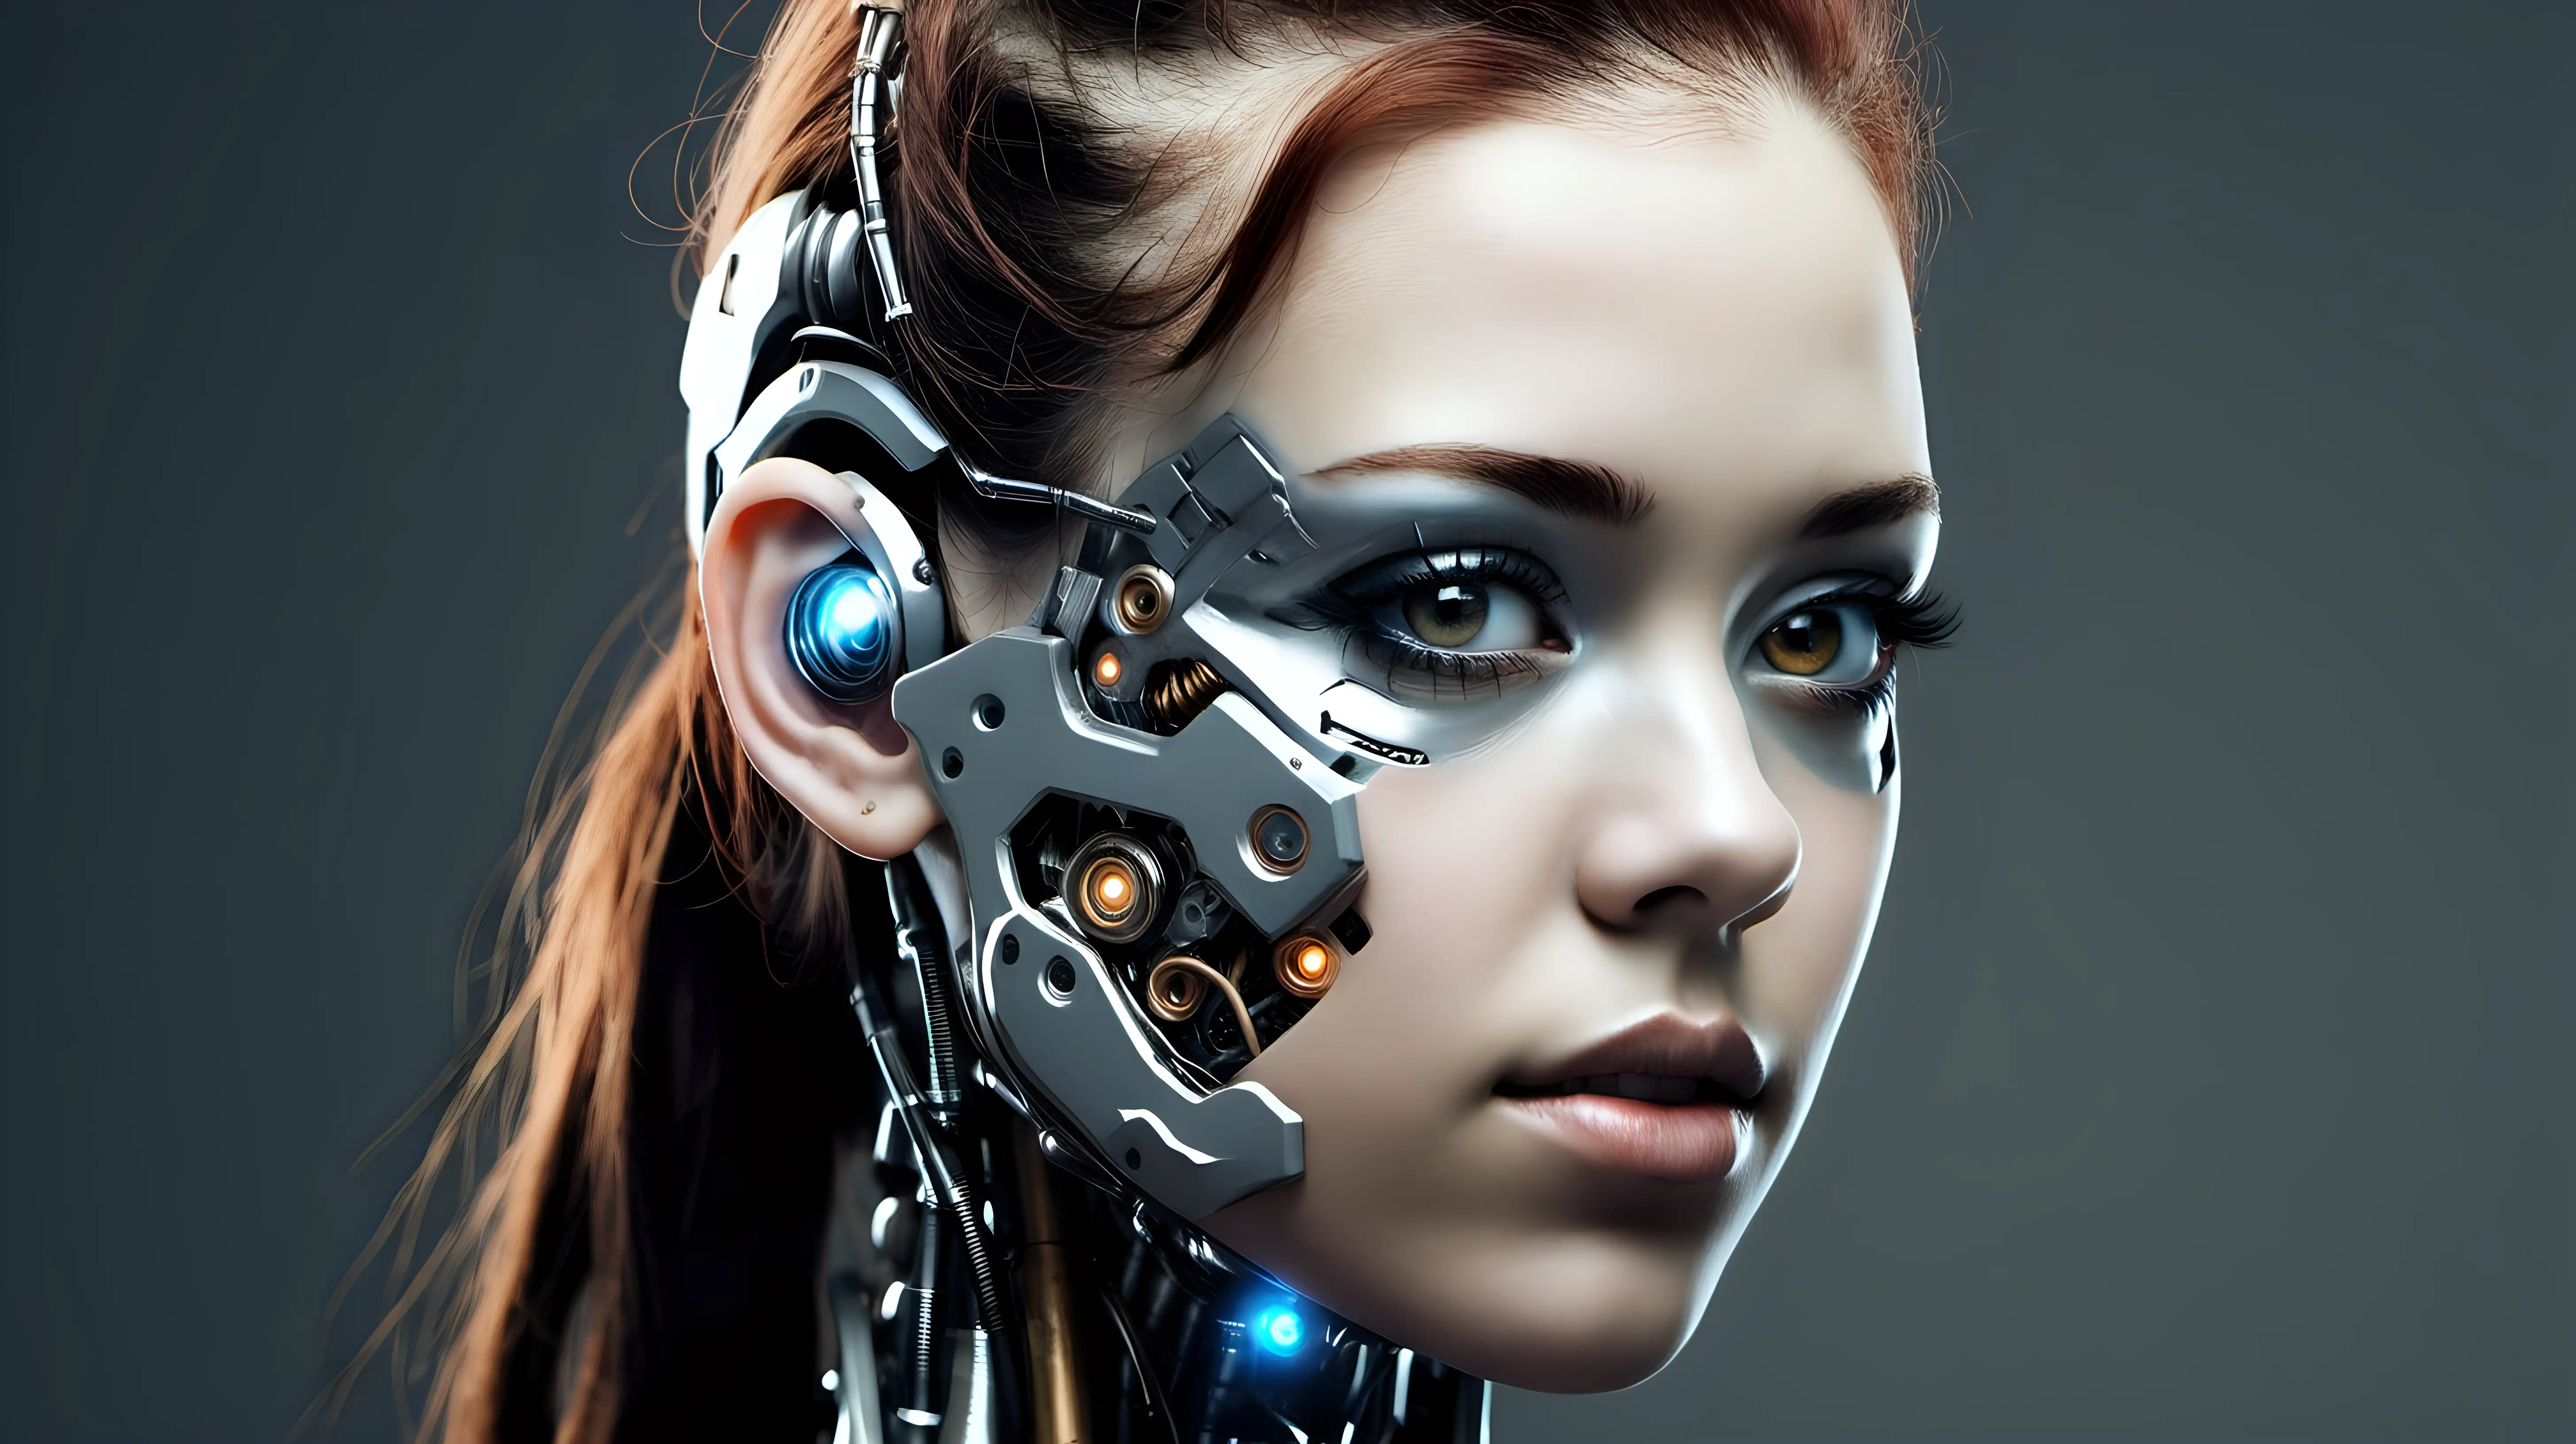 Beautiful 18YearOld Cyborg Woman with Intricate Cybernetic Features